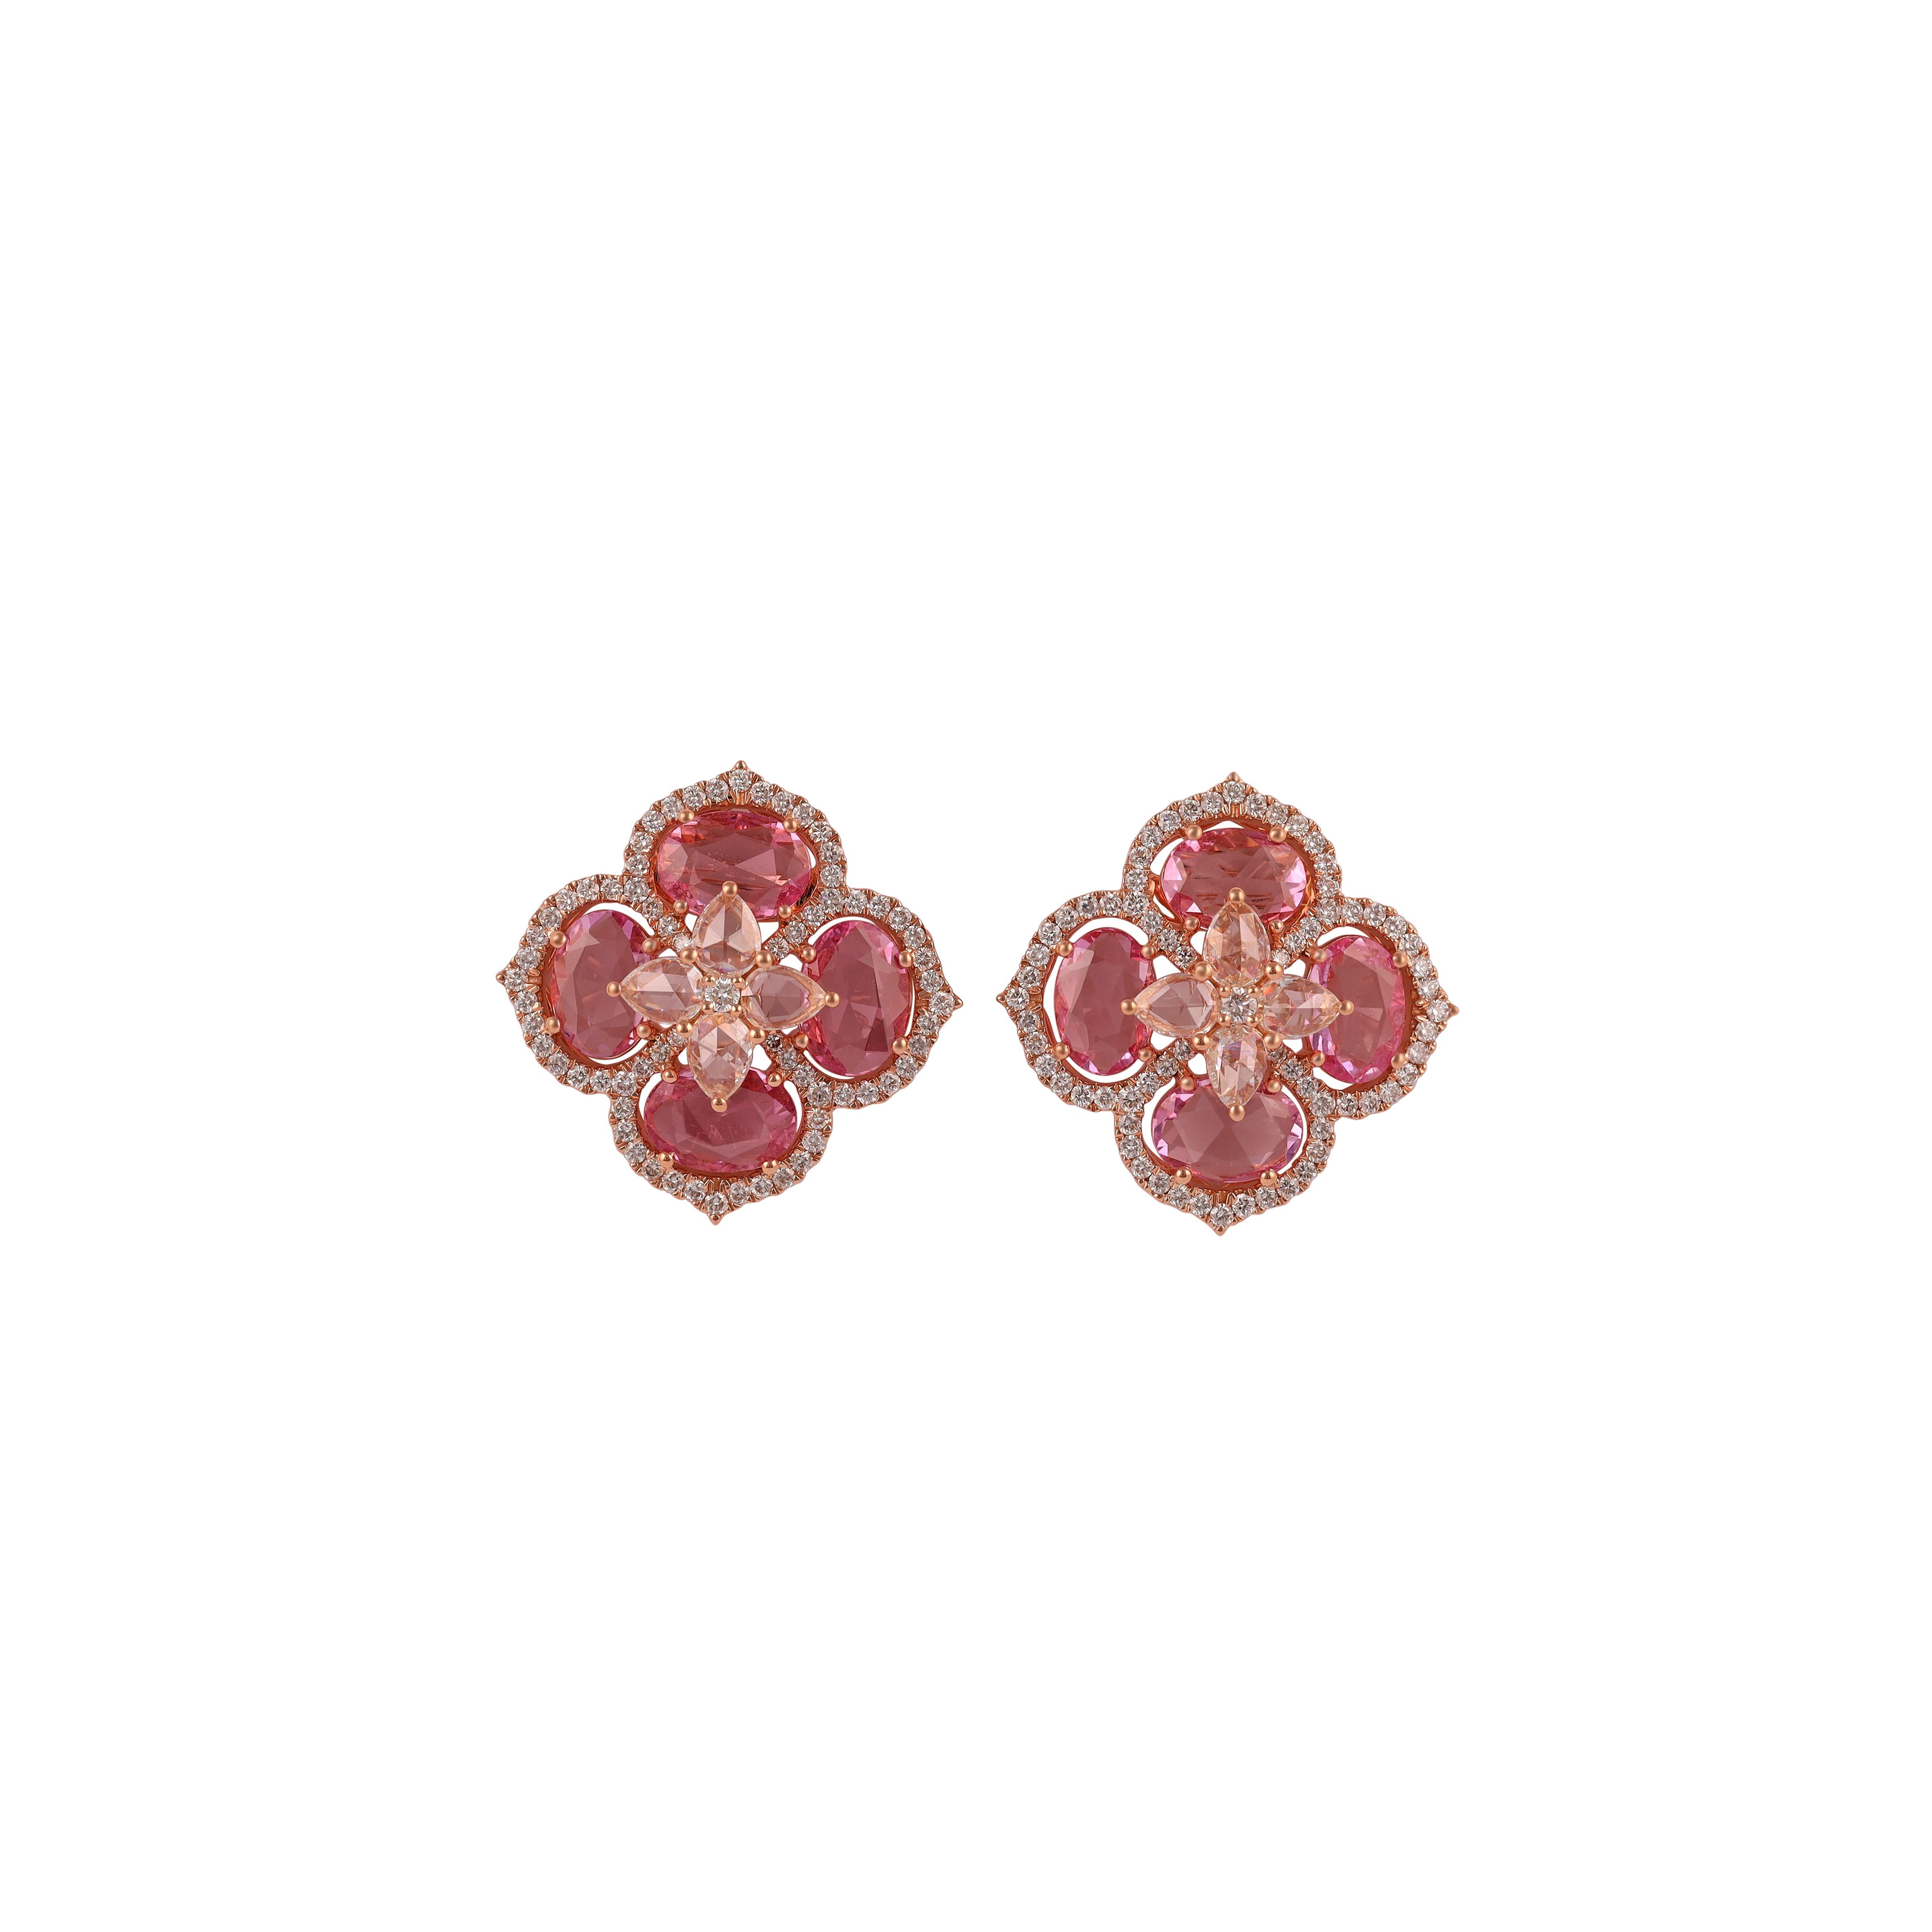 Made of (7.51 Gram) 18k Solid Rose gold, This beautiful set features  3.36ct oval pink sapphires. The sapphires are accentuated by sparkling round cut & Rose cut diamonds that weighs  0.68ct & 0.66ct.

